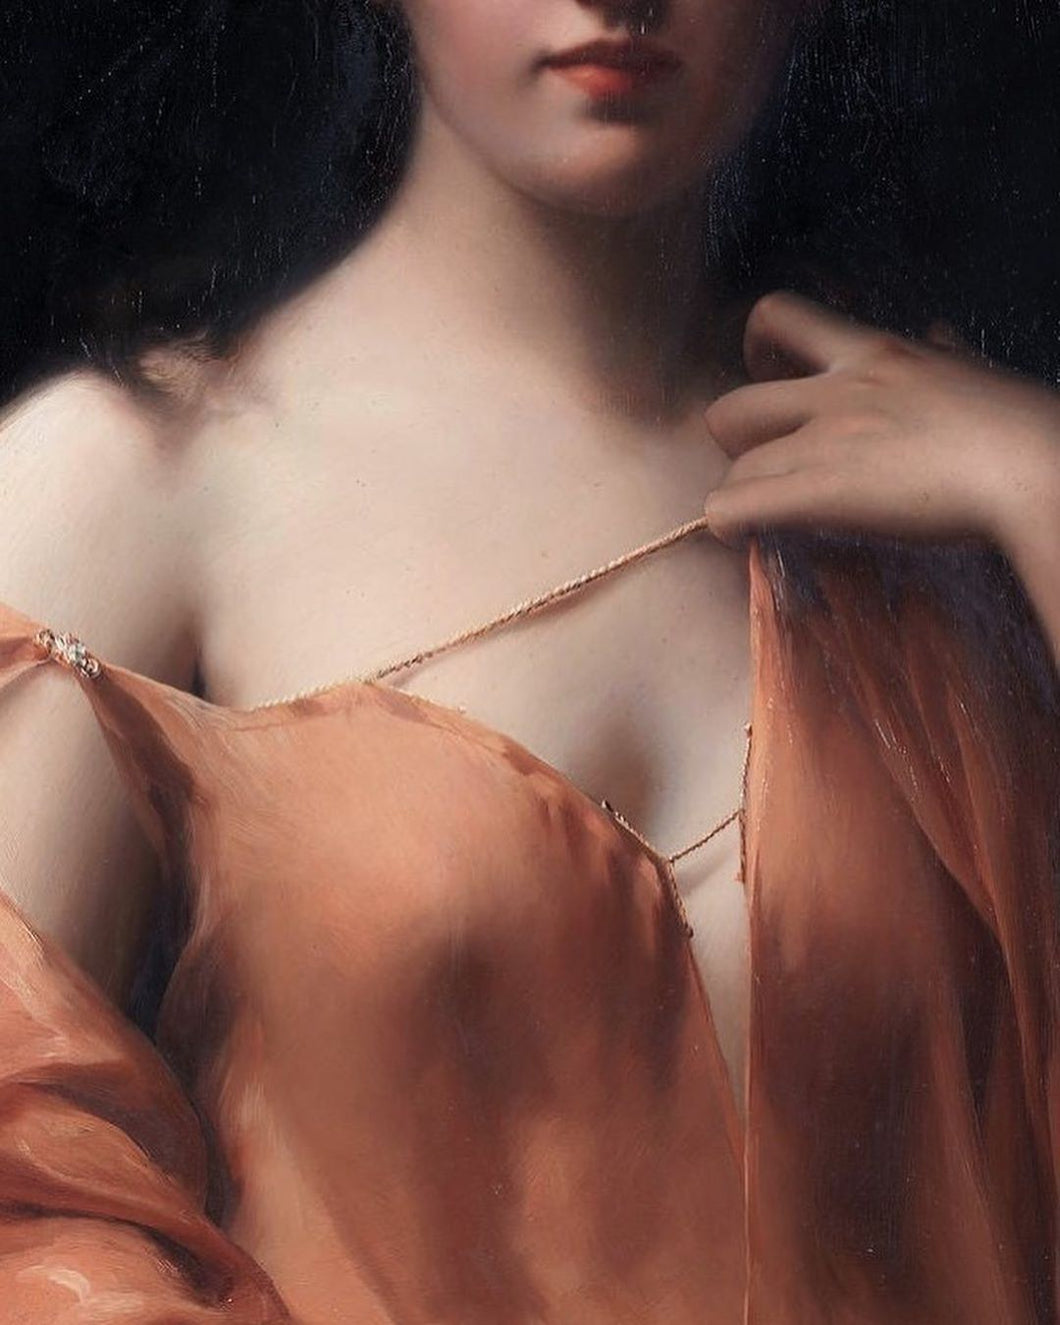 A light skinned woman with dark hair wearing a diaphanous orange silken gown delicately loosens a tie to reveal the smooth expanse of her shoulder and the curved top of her breast.